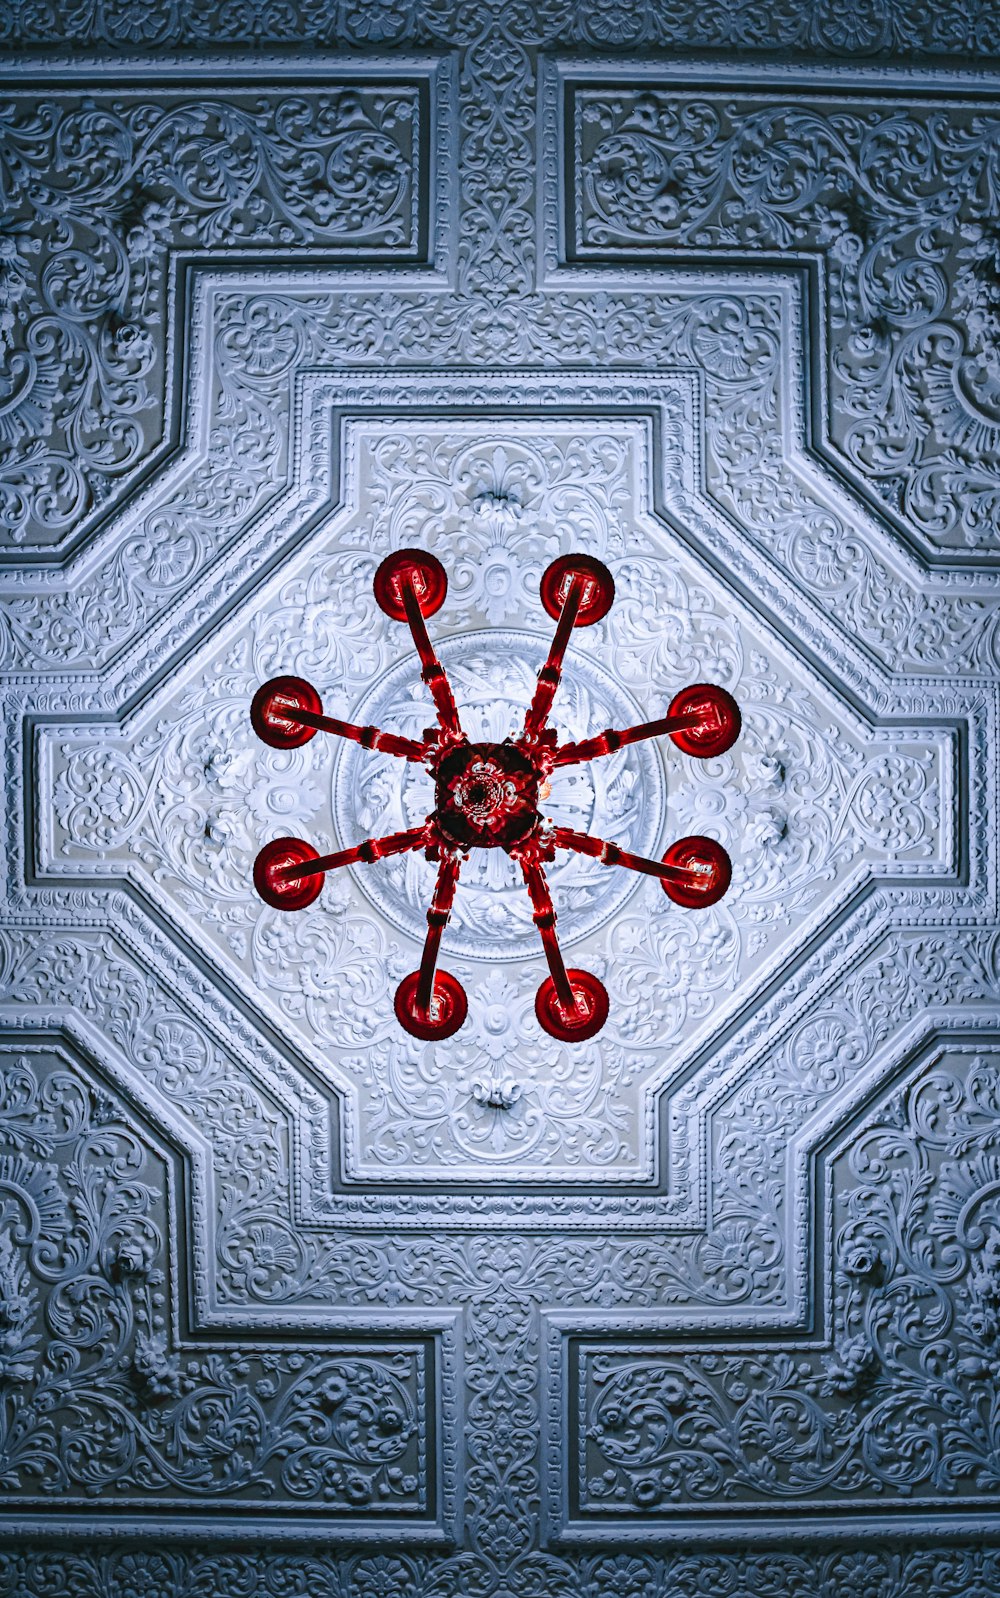 a ceiling in a building with a circular design on it